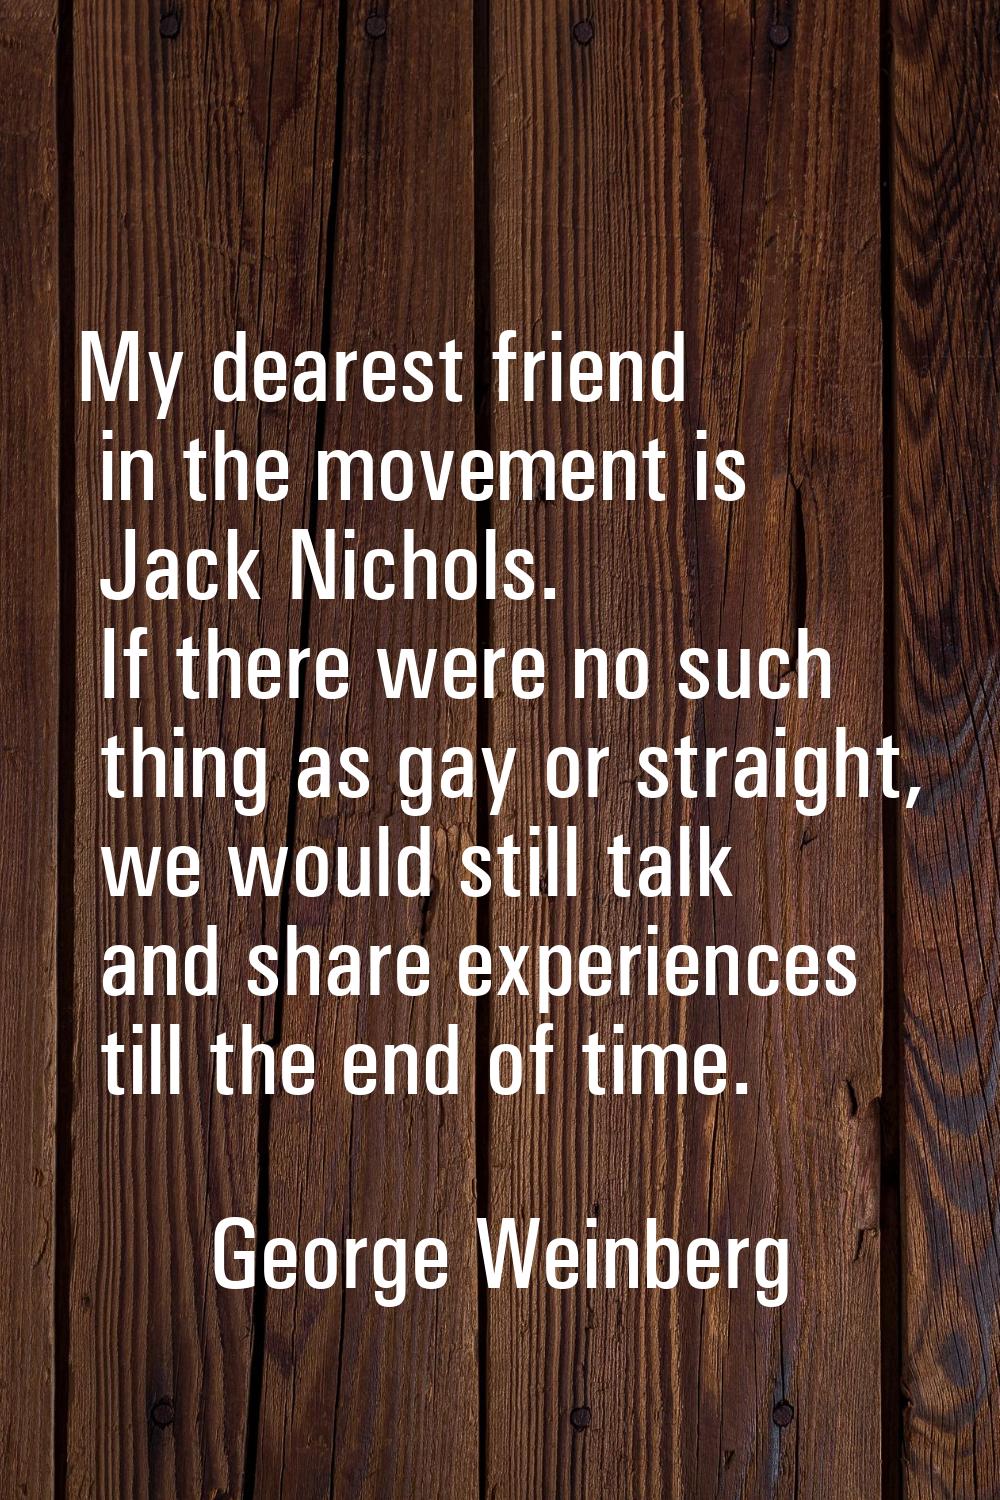 My dearest friend in the movement is Jack Nichols. If there were no such thing as gay or straight, 